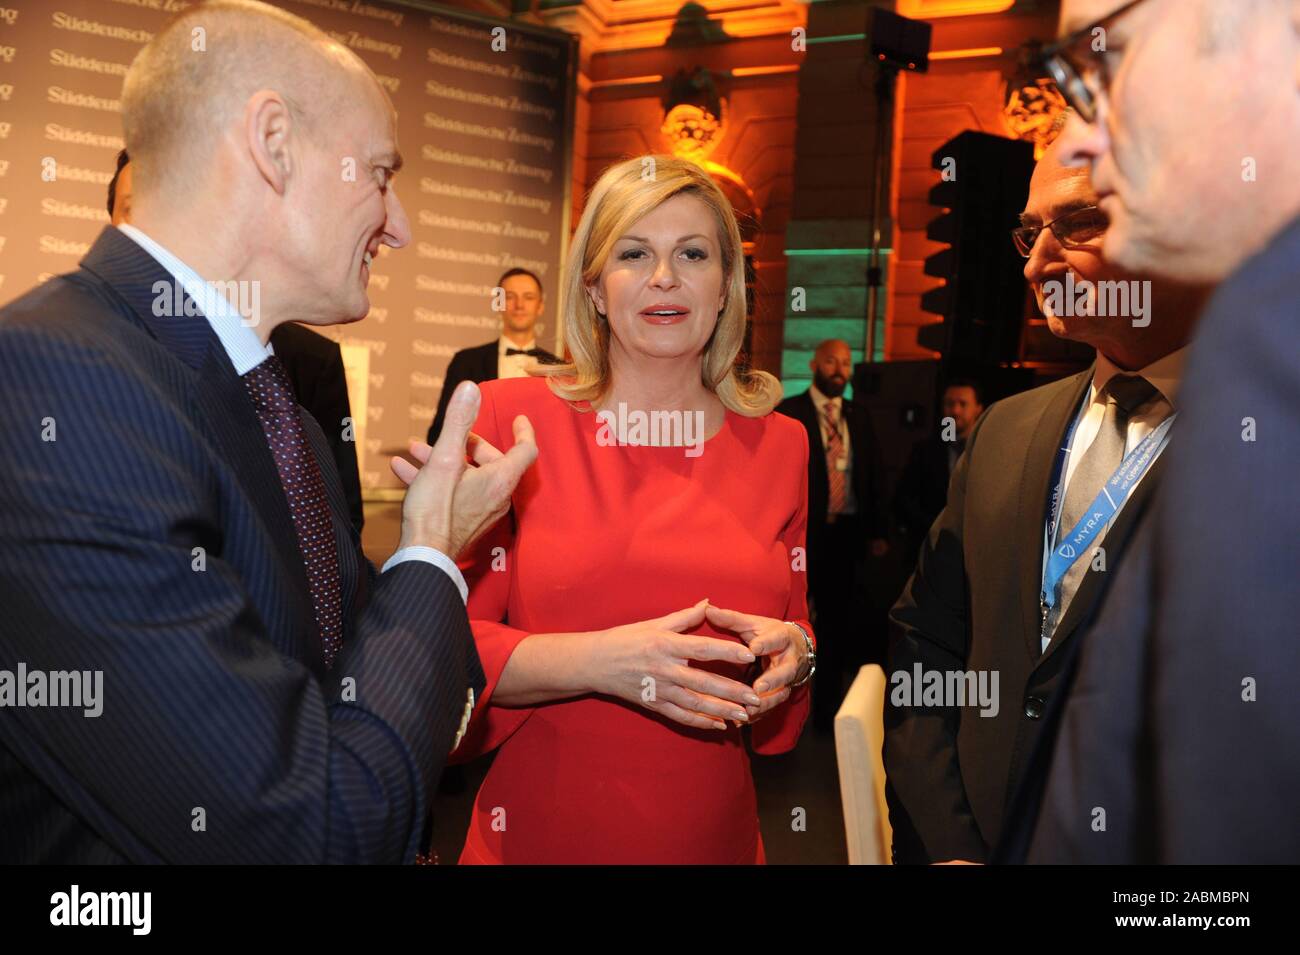 Croatian President Kolinda Grabar-Kitarovic at the Night of the European Economy. To her left is the editor-in-chief of the Süddeutsche Zeitung Wolfgang Krach. [automated translation] Stock Photo